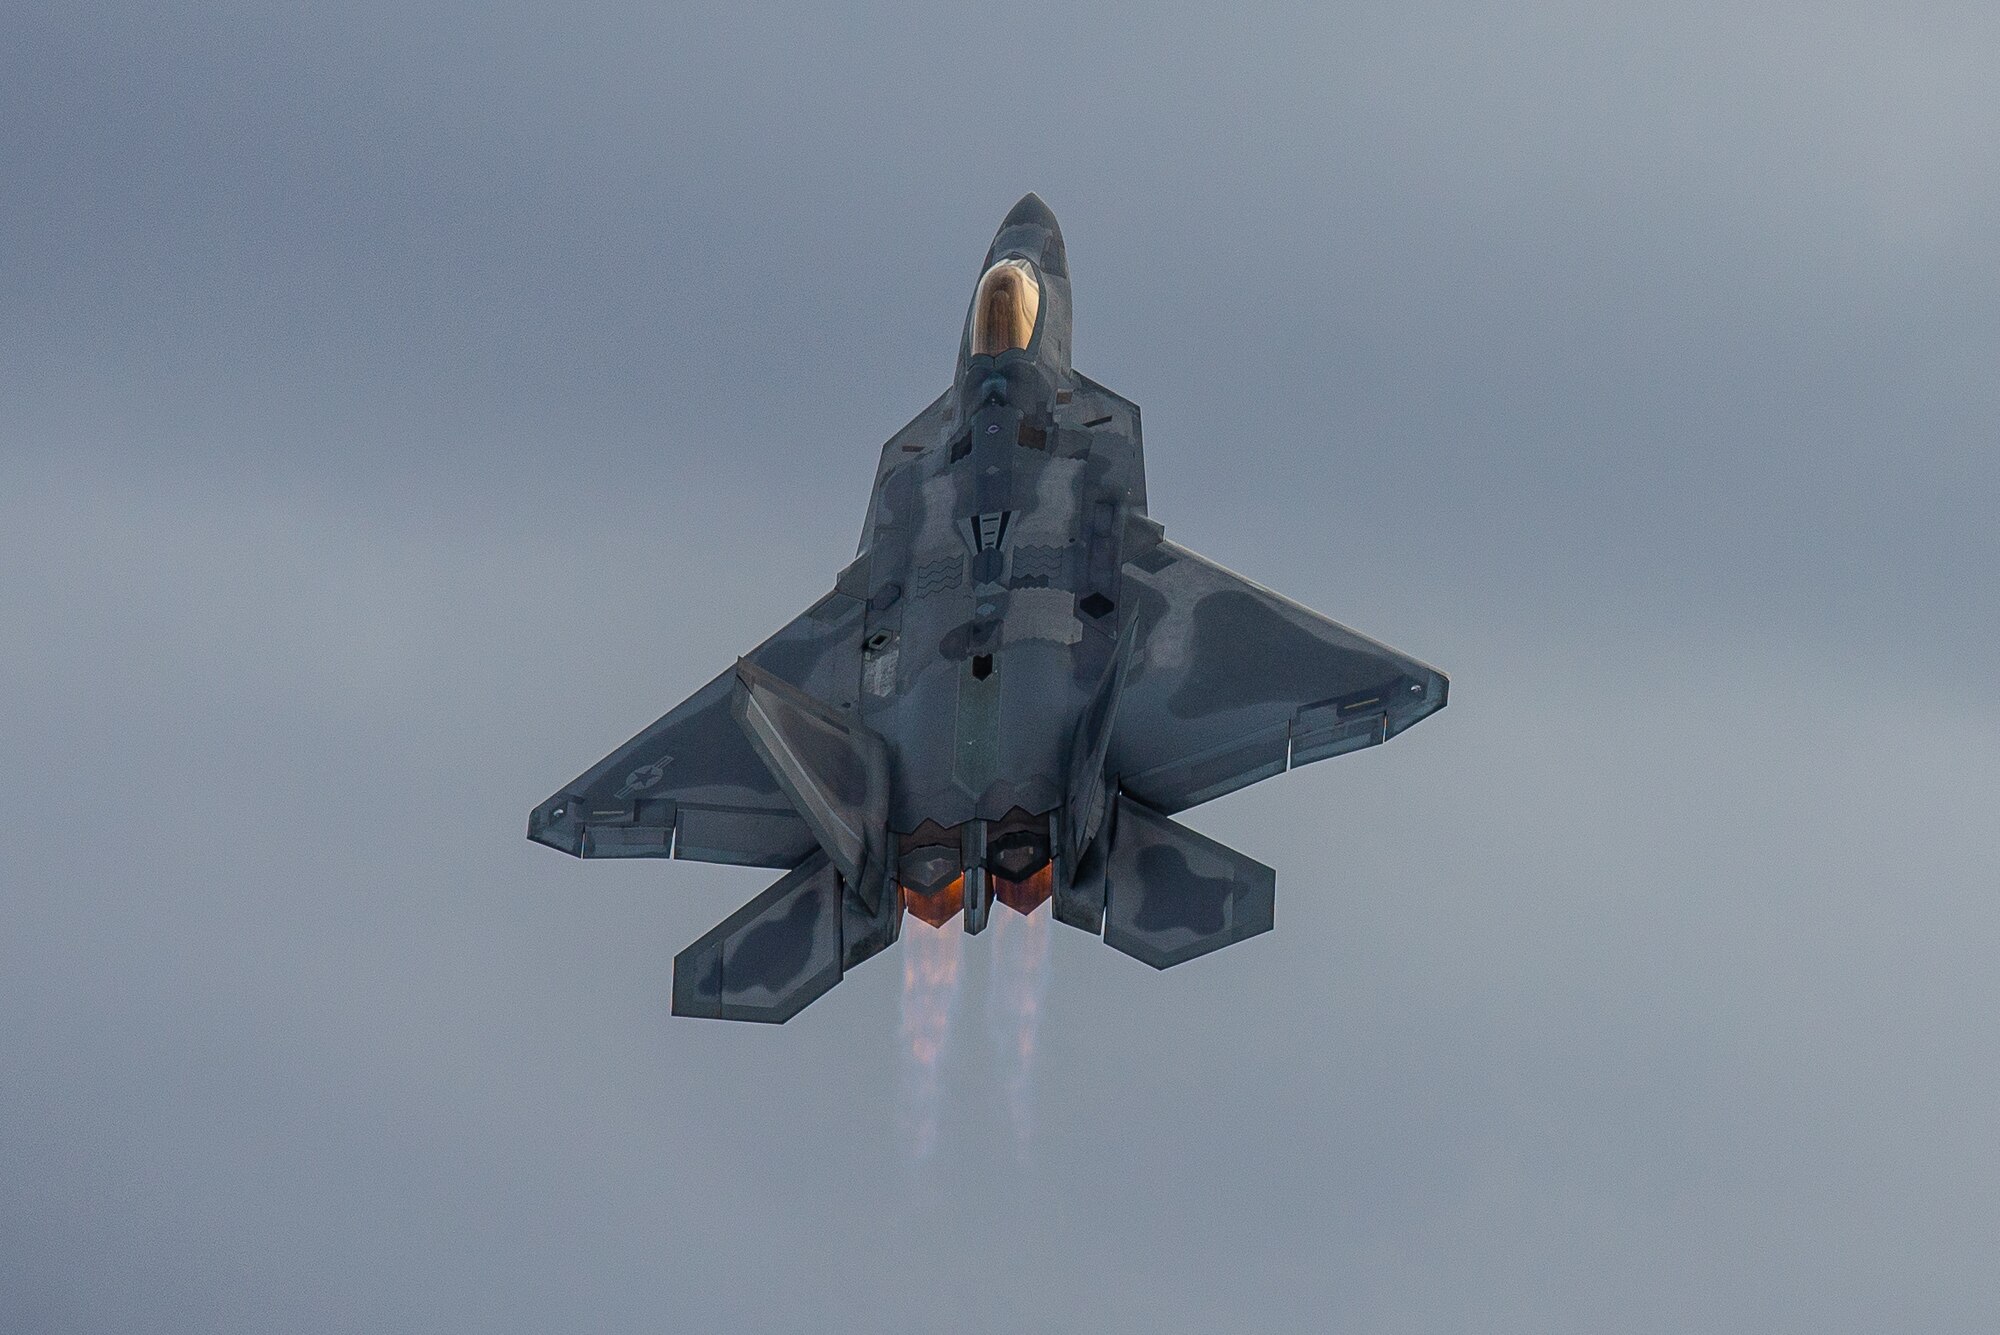 Thunder Over Georgia to feature 2019 F-22 Demonstration Team